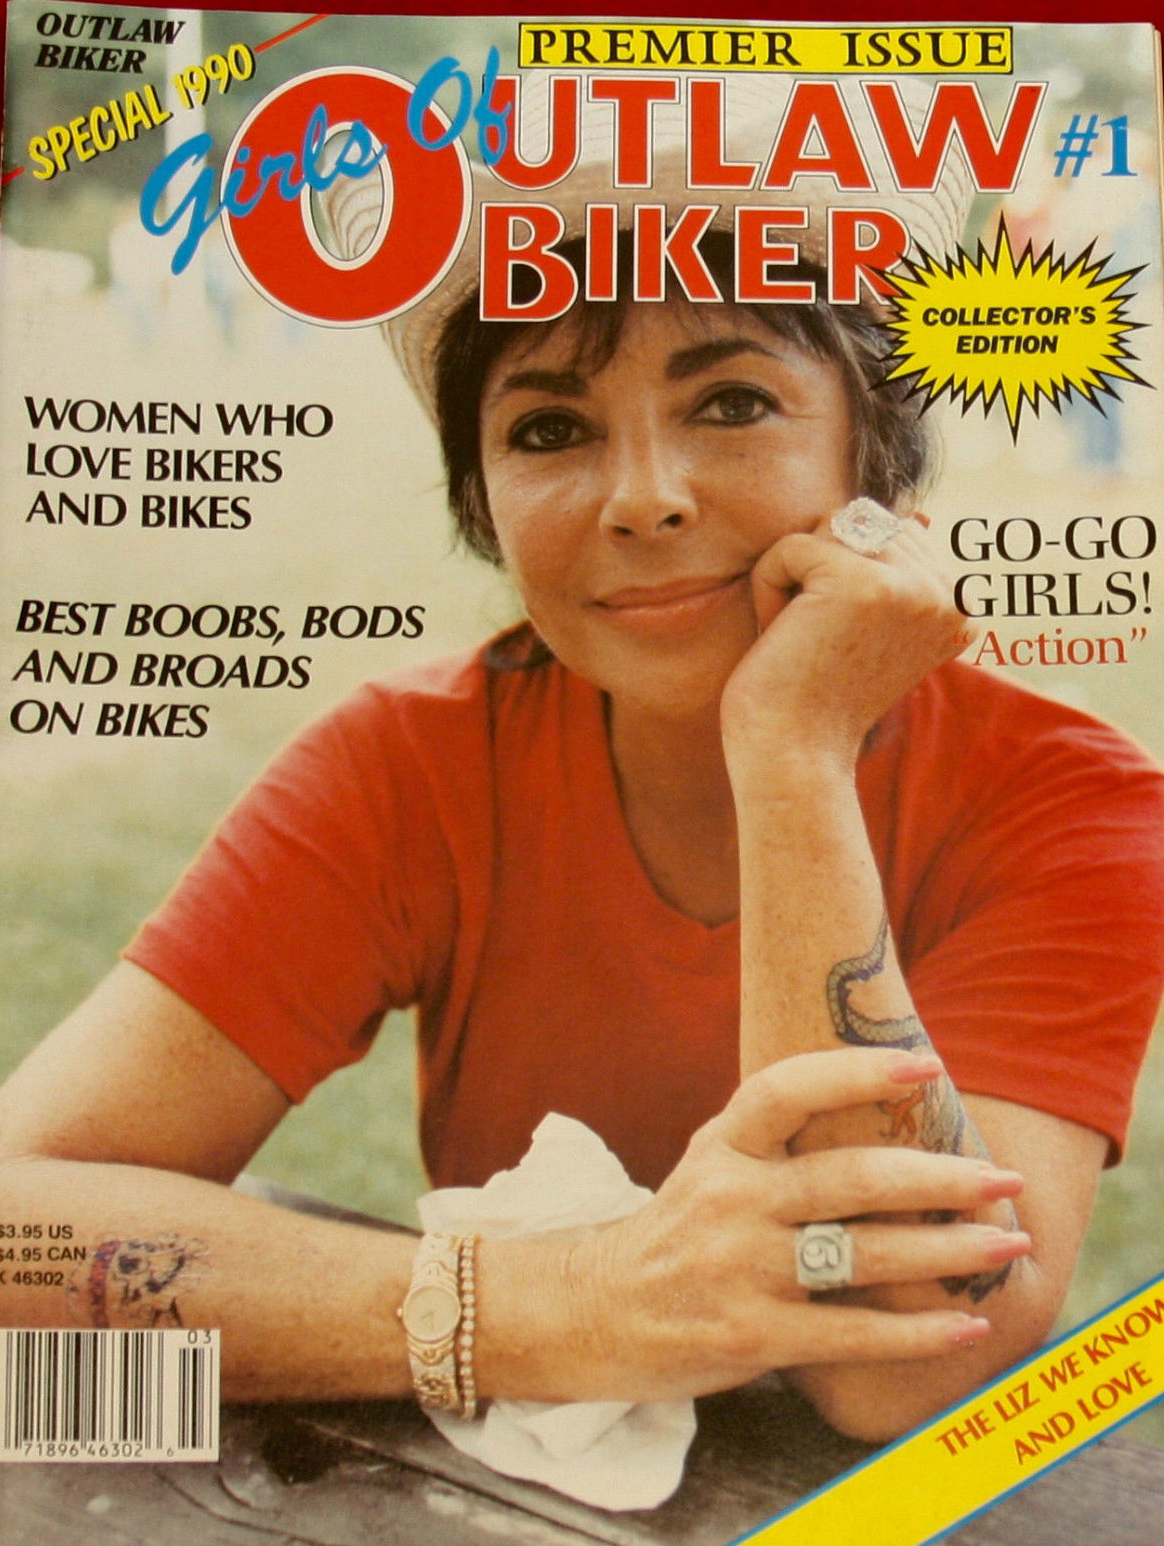 Outlaw Biker Sepcial 1990 magazine back issue Outlaw Biker magizine back copy Outlaw Biker Sepcial 1990 Magazine Back Issue for Bike Riding Rebels and Members of Outlaw Motorcycle Clubs. Women Who Love Bikers And Bikes.